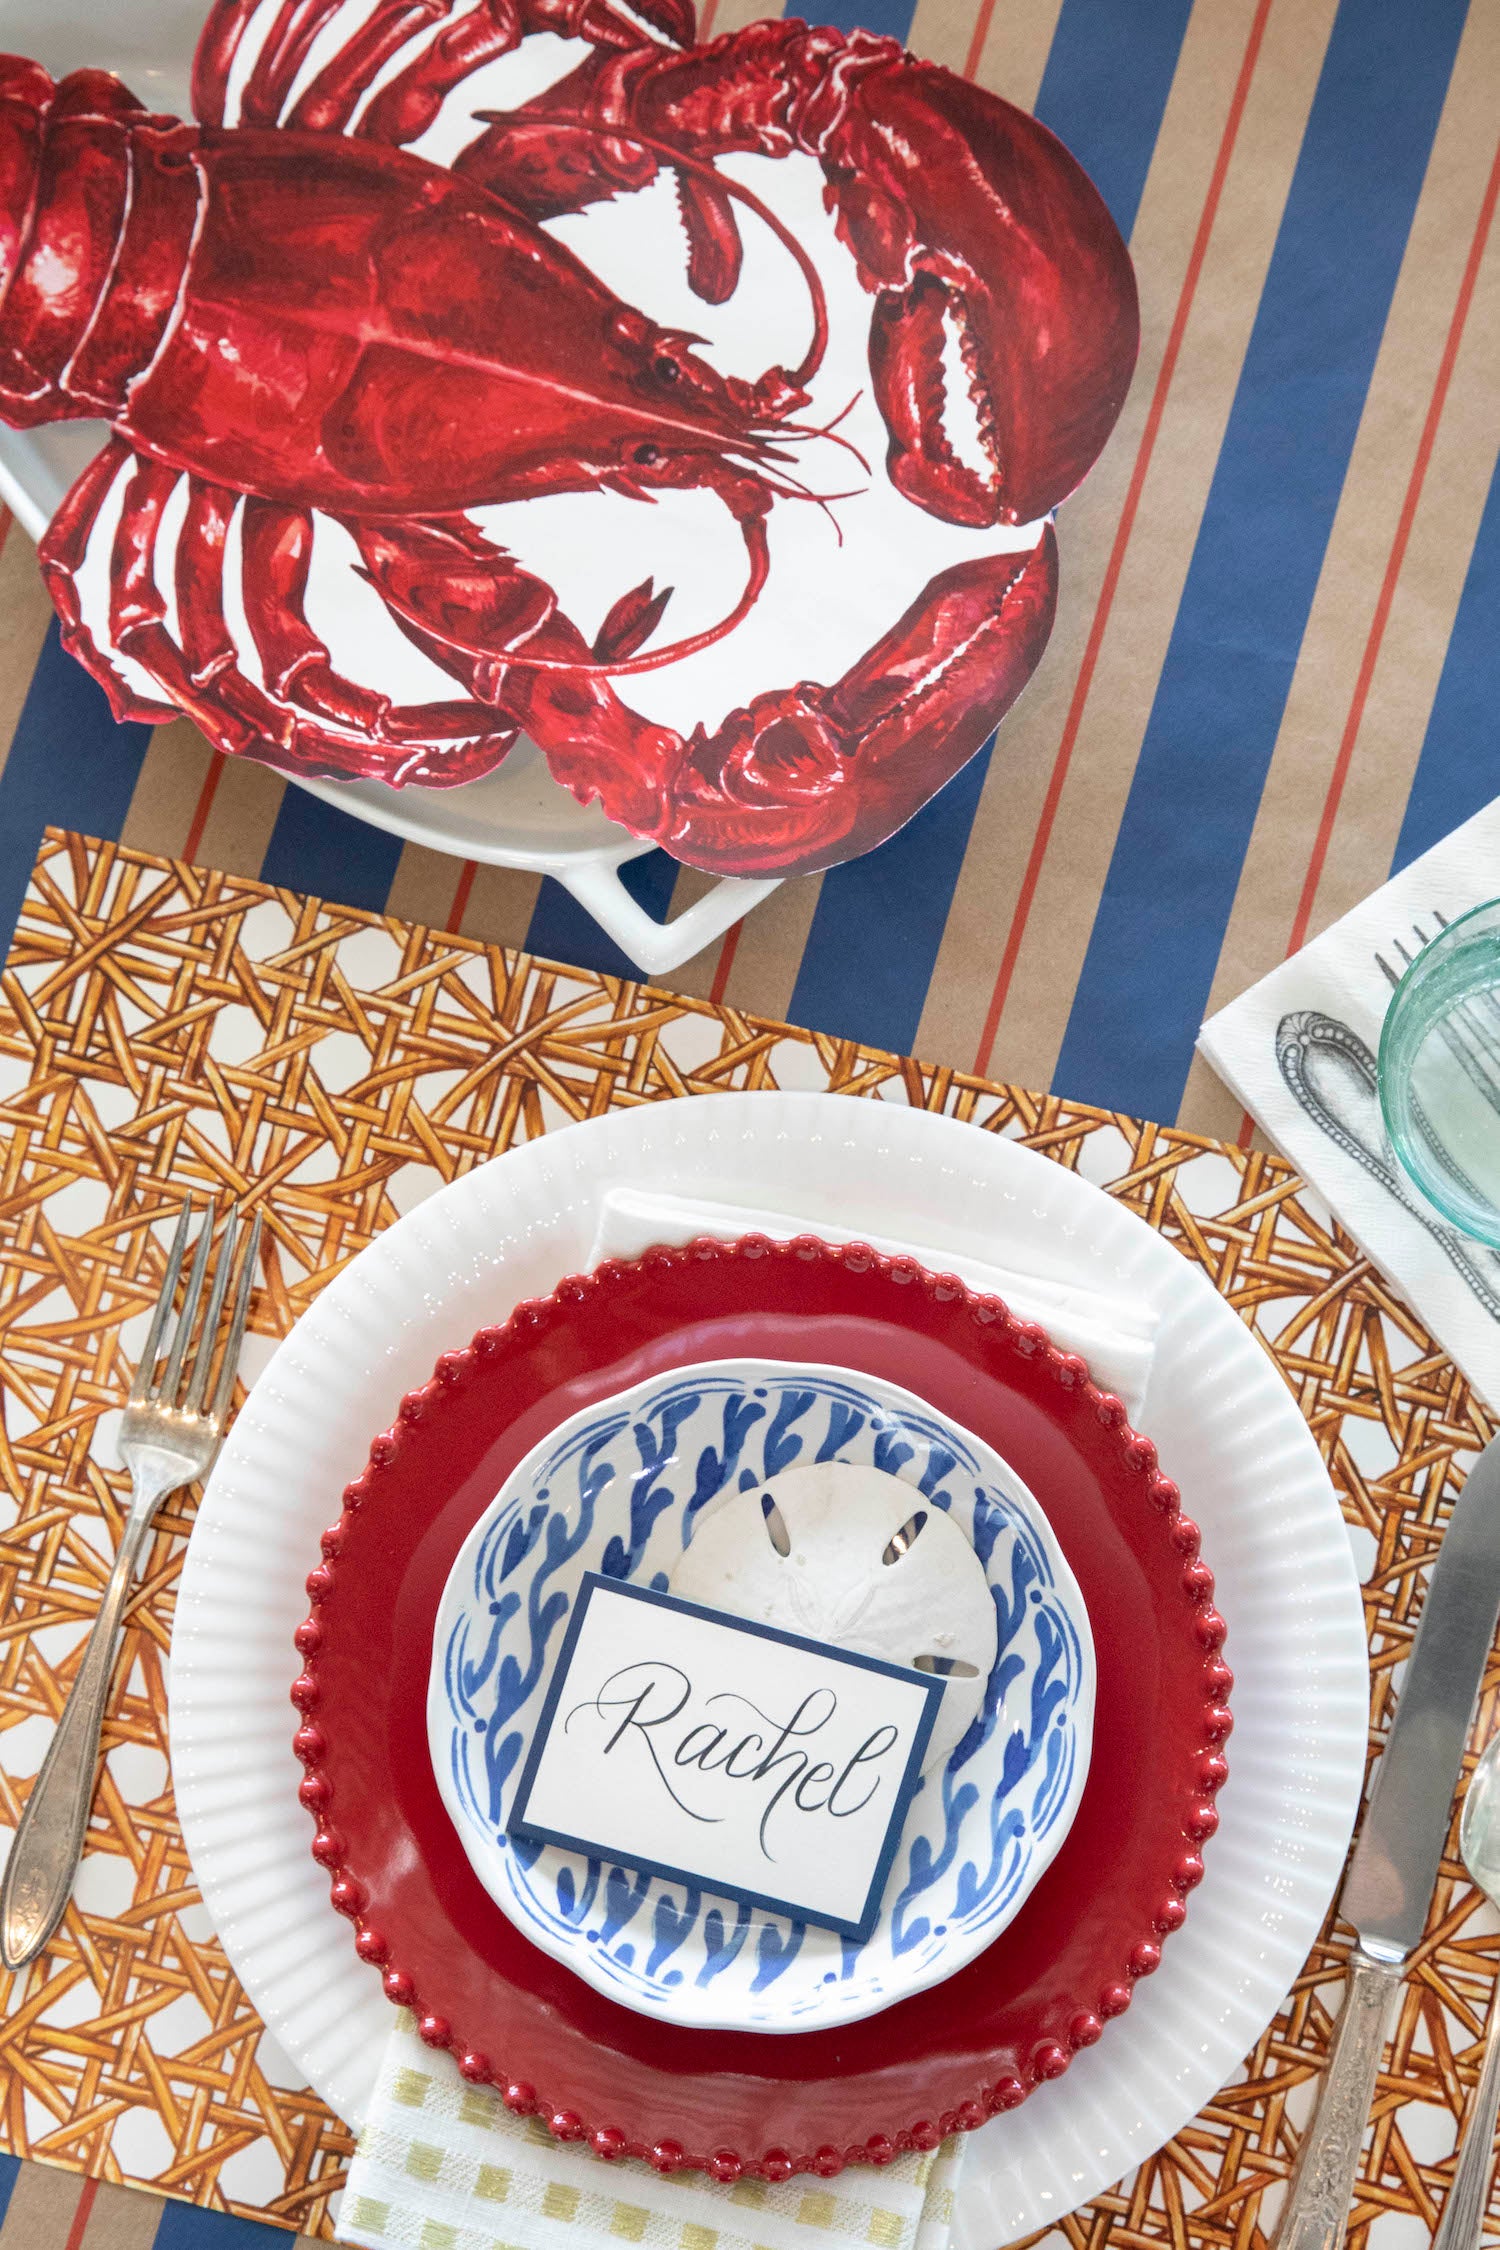 The Die-cut Lobster Placemat resting on a serving dish in an elegant place setting, from above.